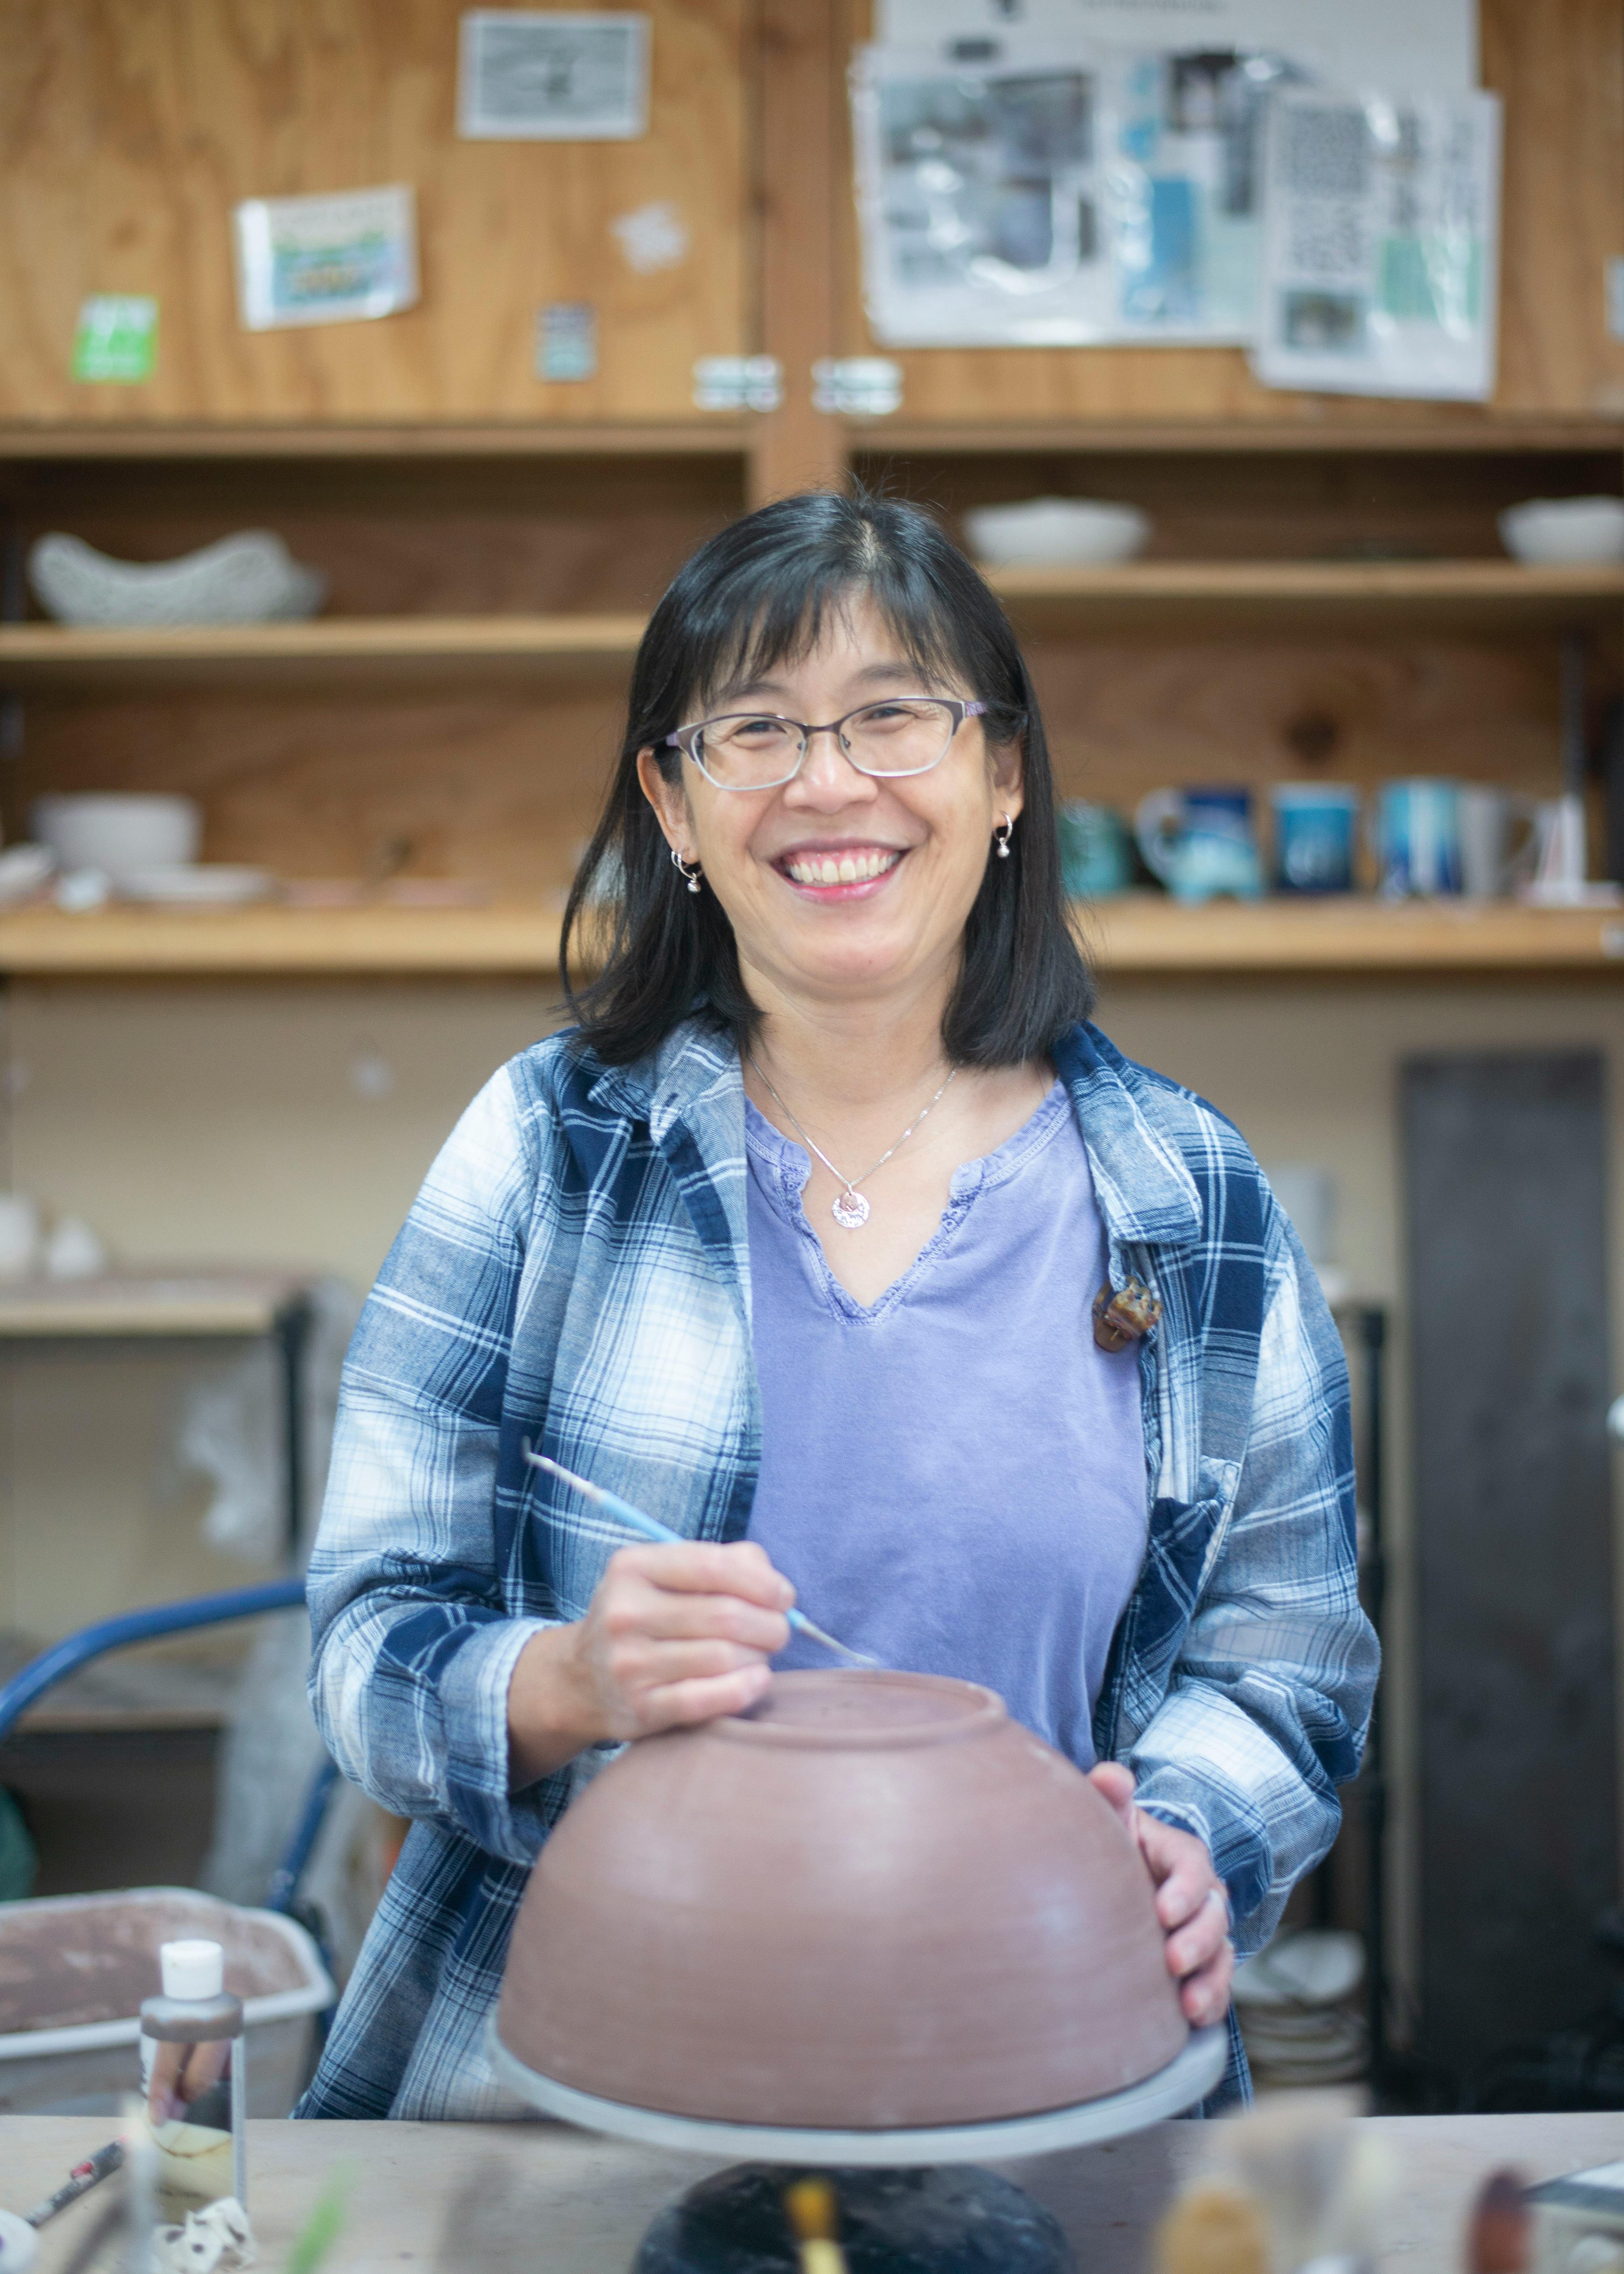 ceramic artist standing in studio smiling and preparing to etch into the bottom of an unfired clay bowl